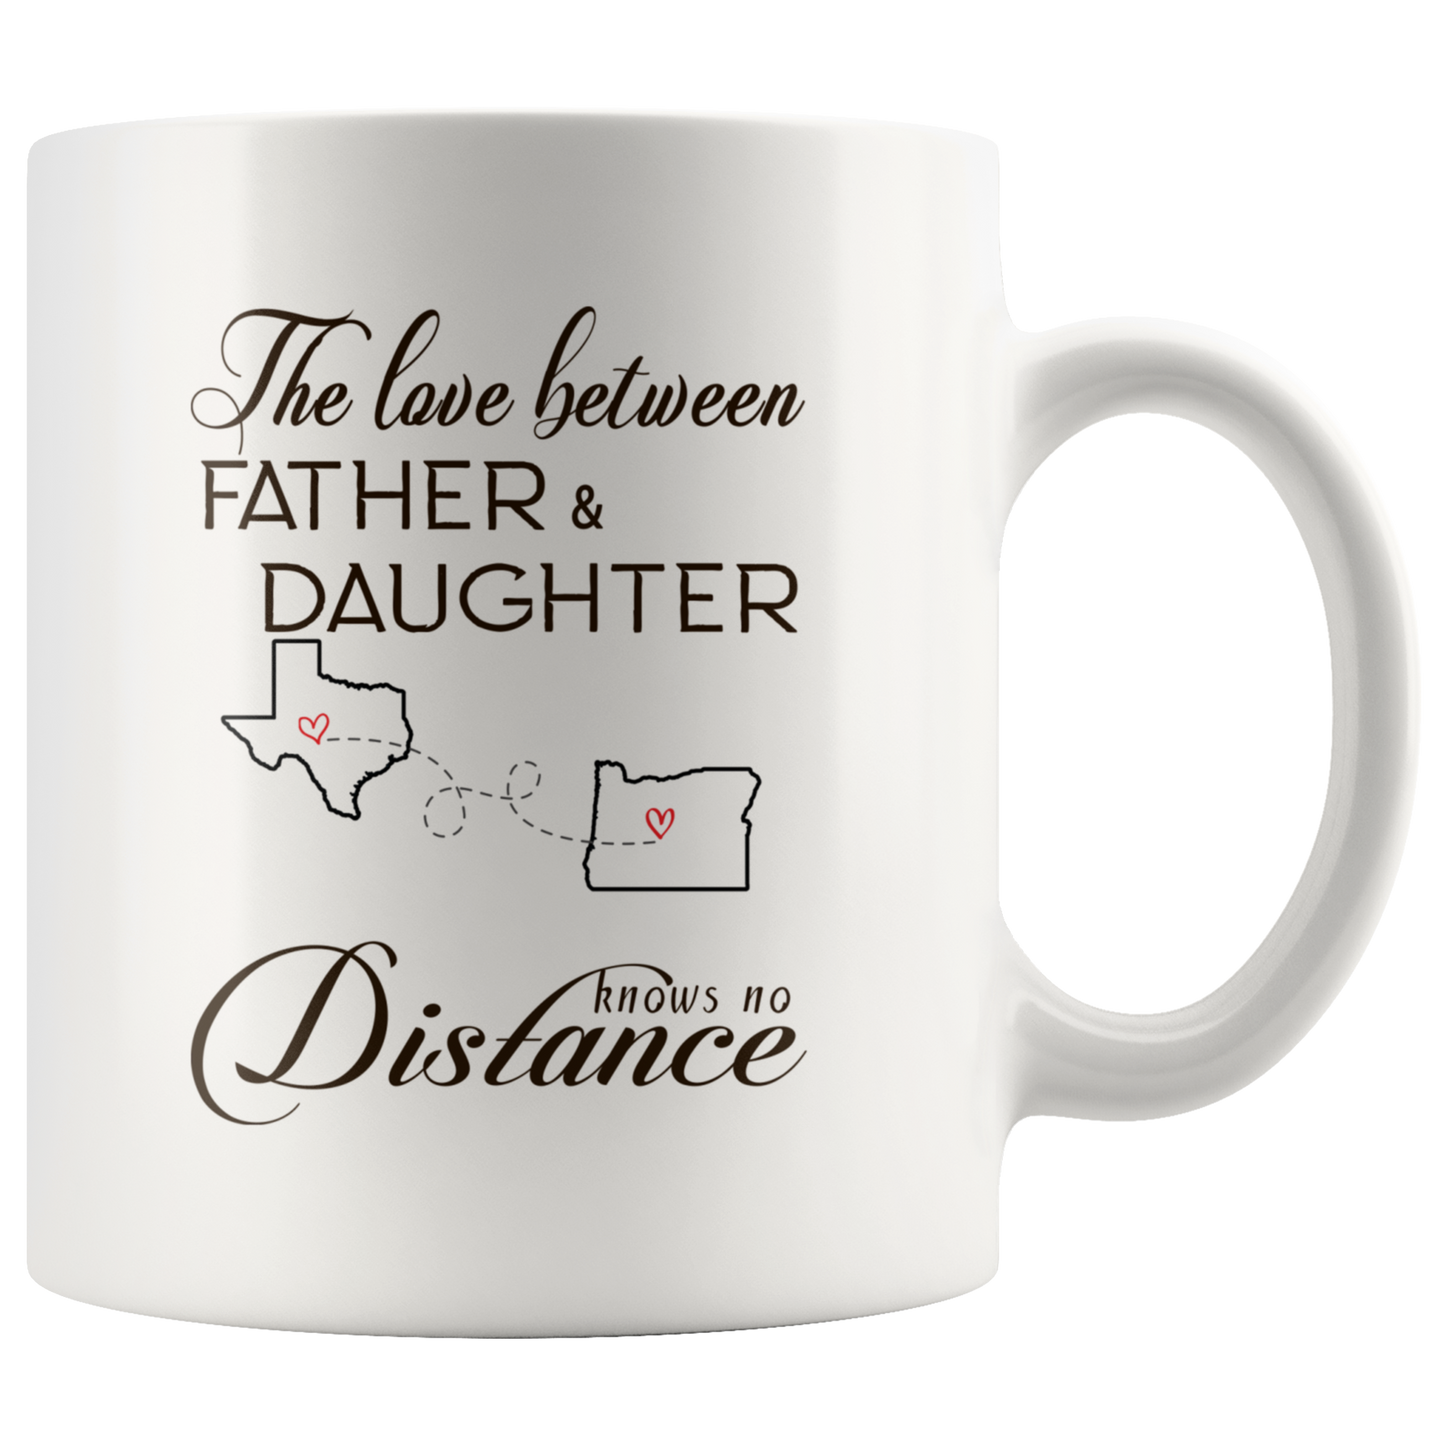 ND20603029-sp-18591 - The Love Between Father And Daughter Knows No Distance, I Lo